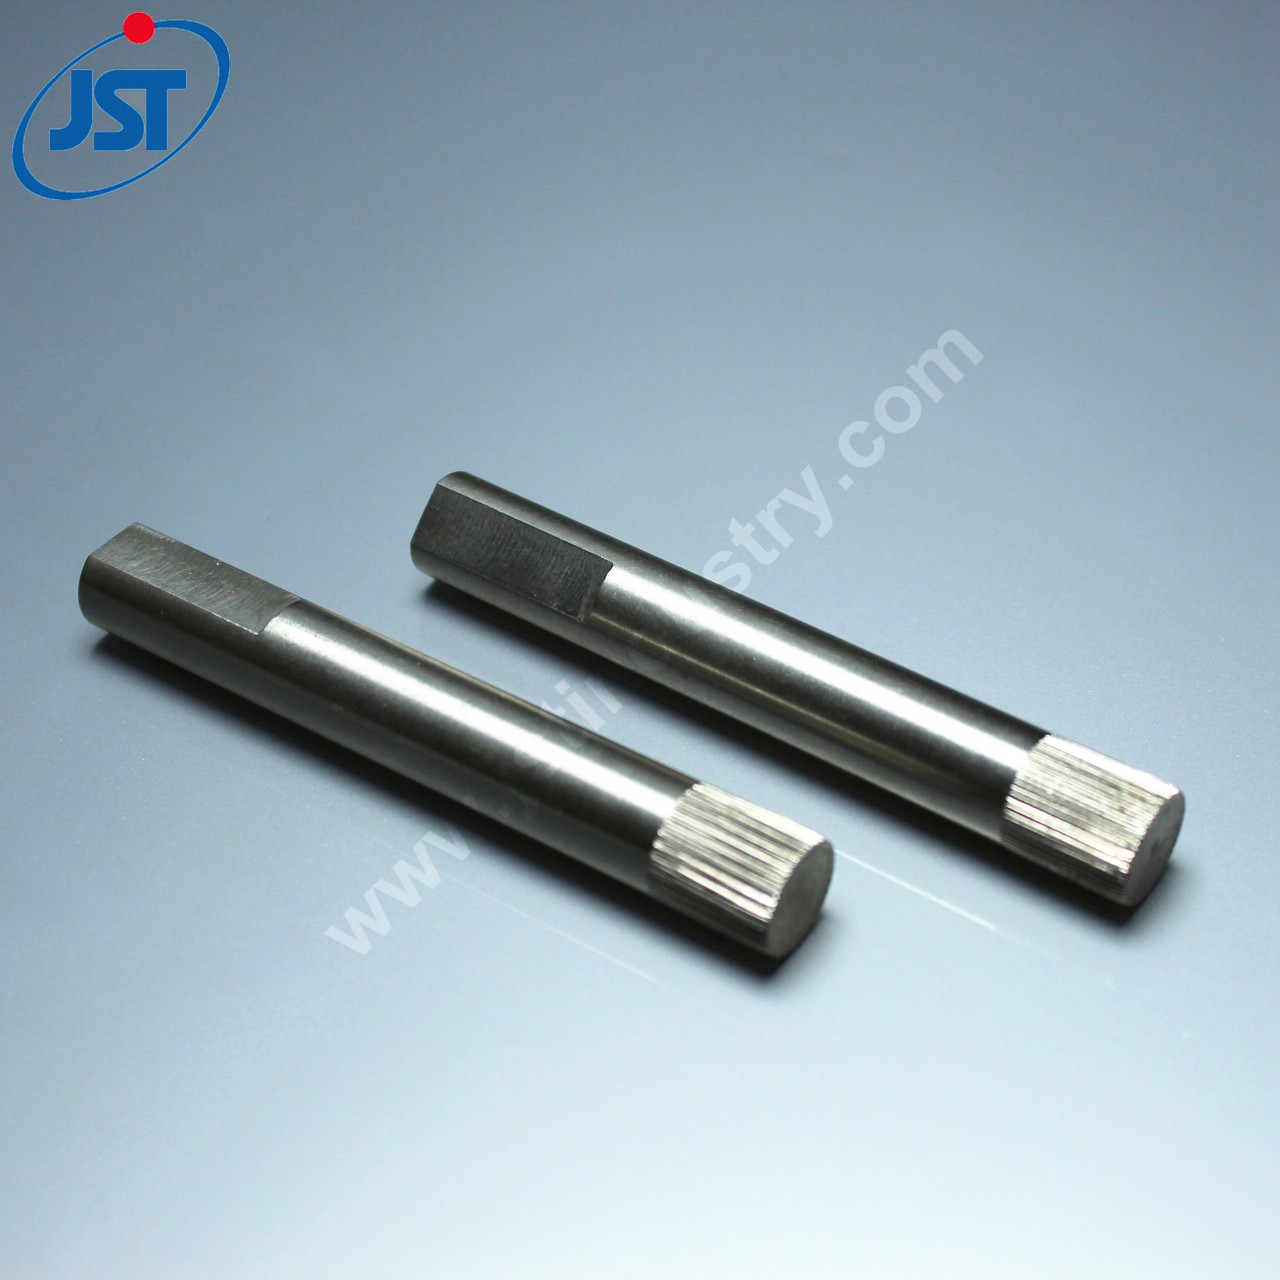 OEM CNC Turning Steel Spare Parts for Milling Shaft